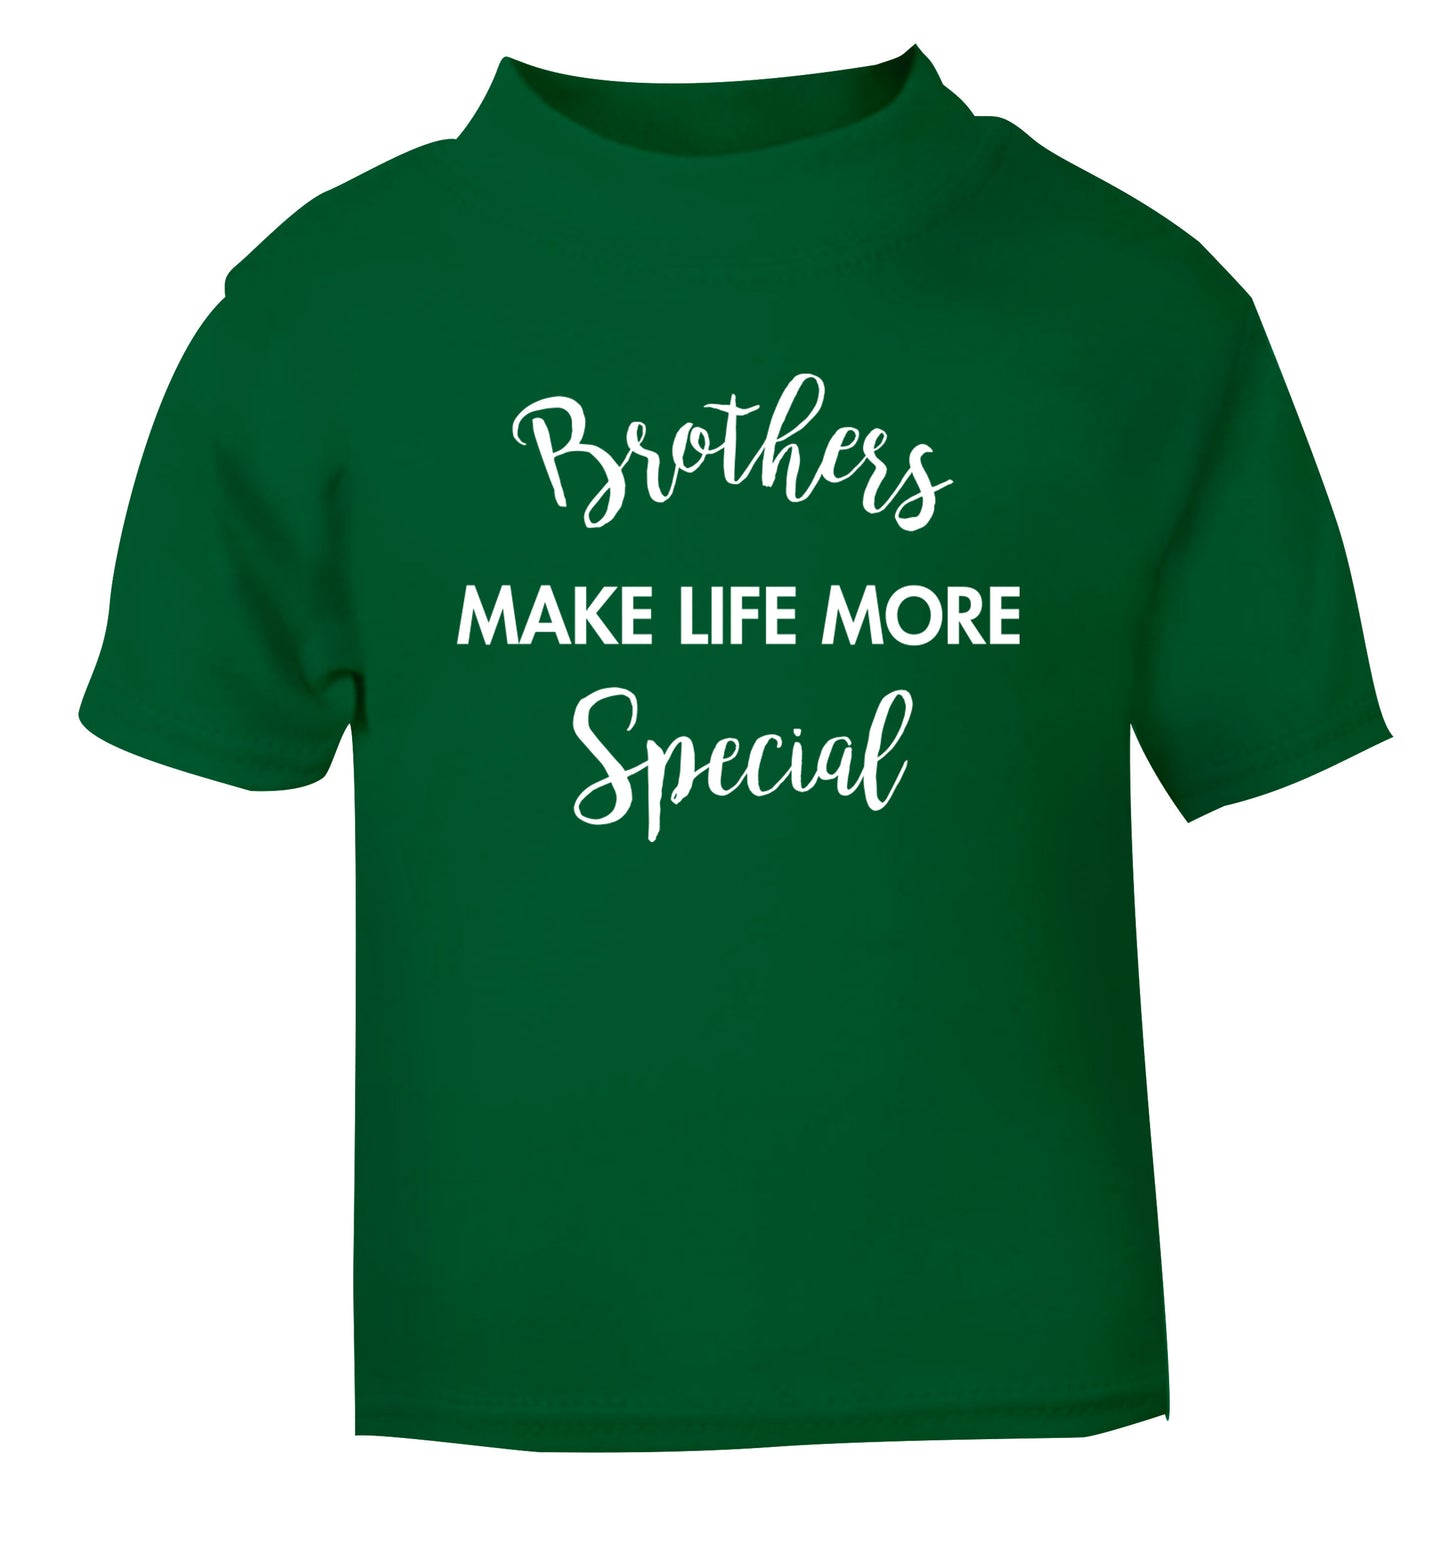 Brothers make life more special green Baby Toddler Tshirt 2 Years